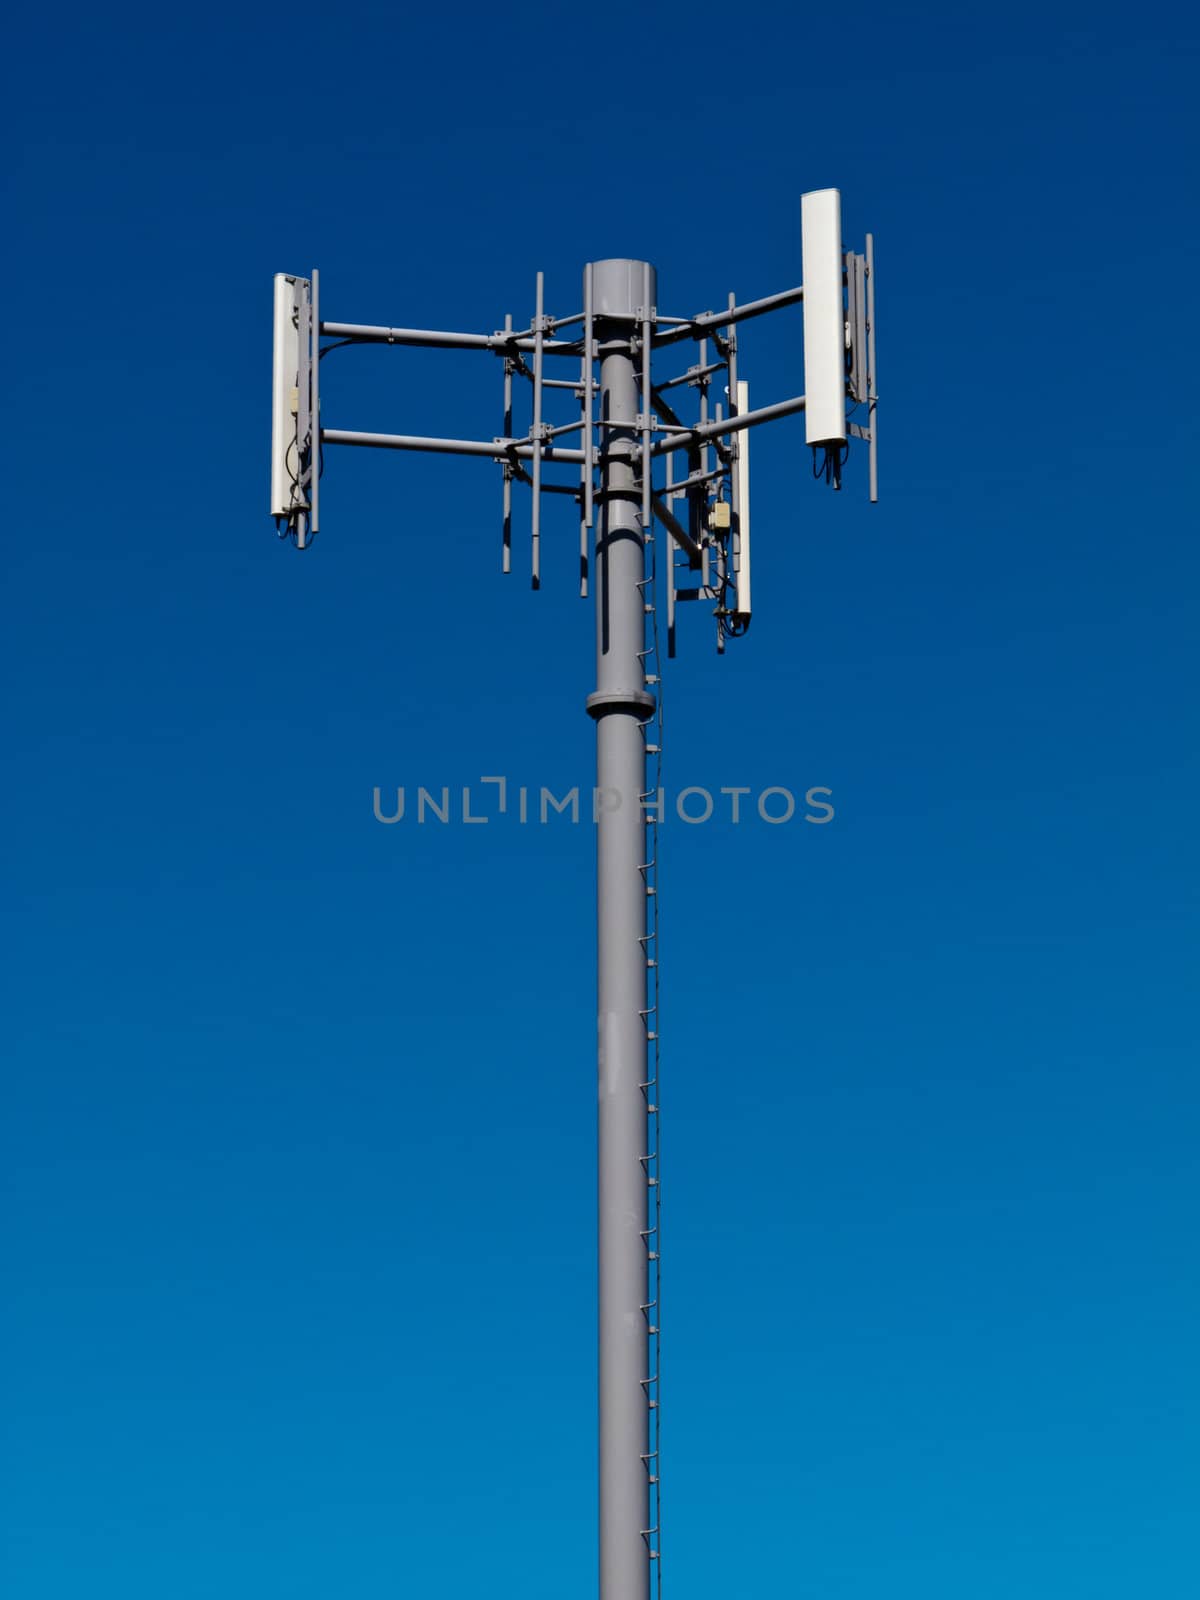 Mobile phone antennas on metal tower on blue sky by PiLens